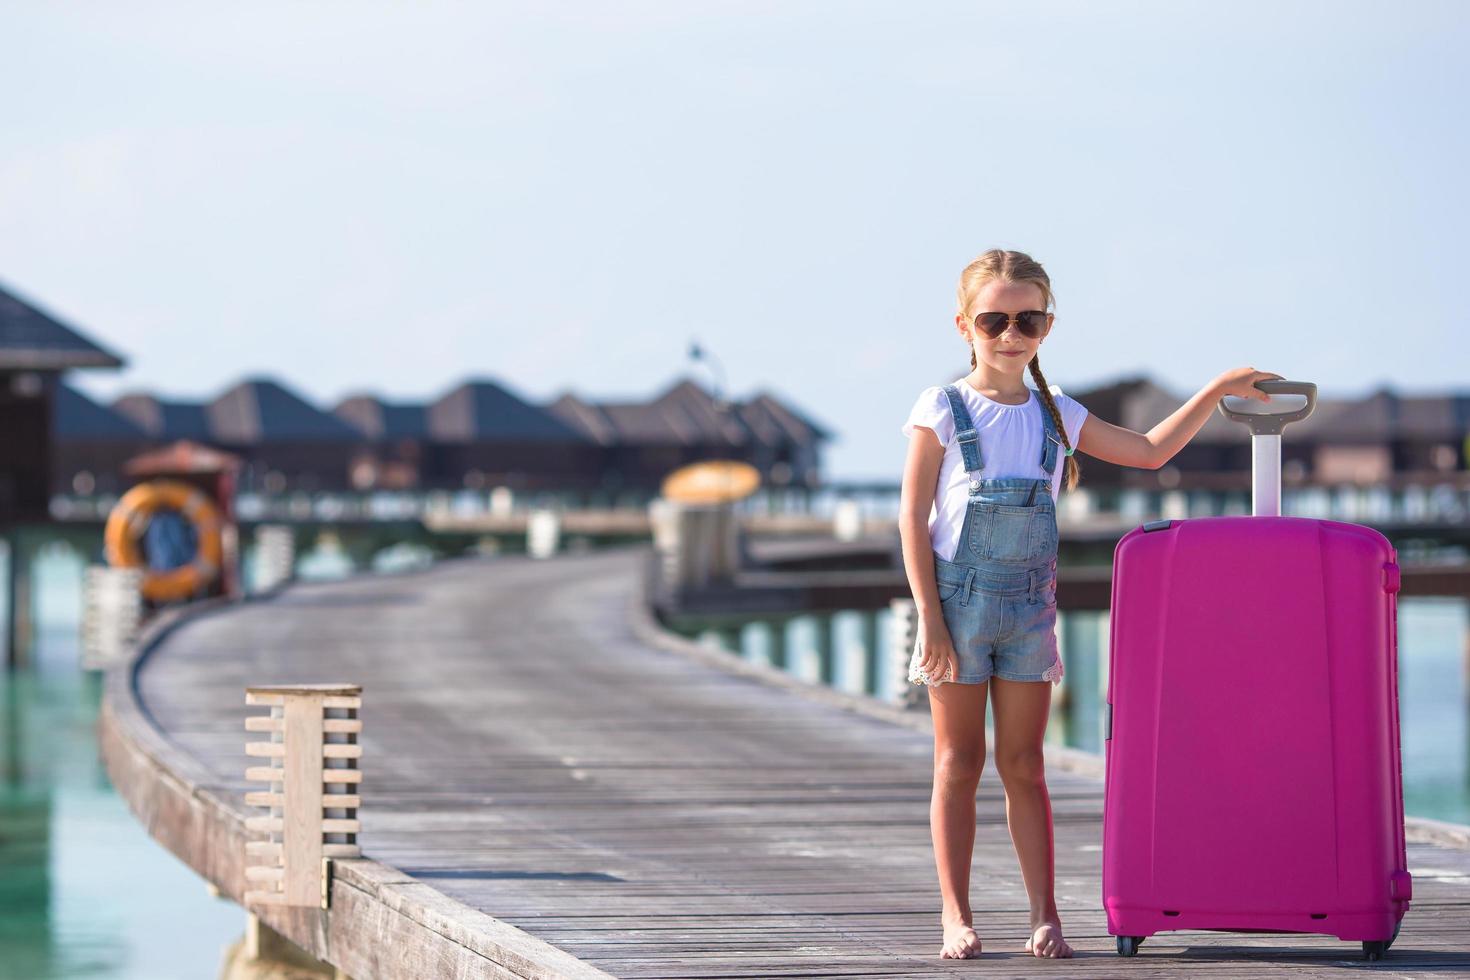 Maldives, South Asia, 2020 - Girl with luggage on a dock at a resort photo